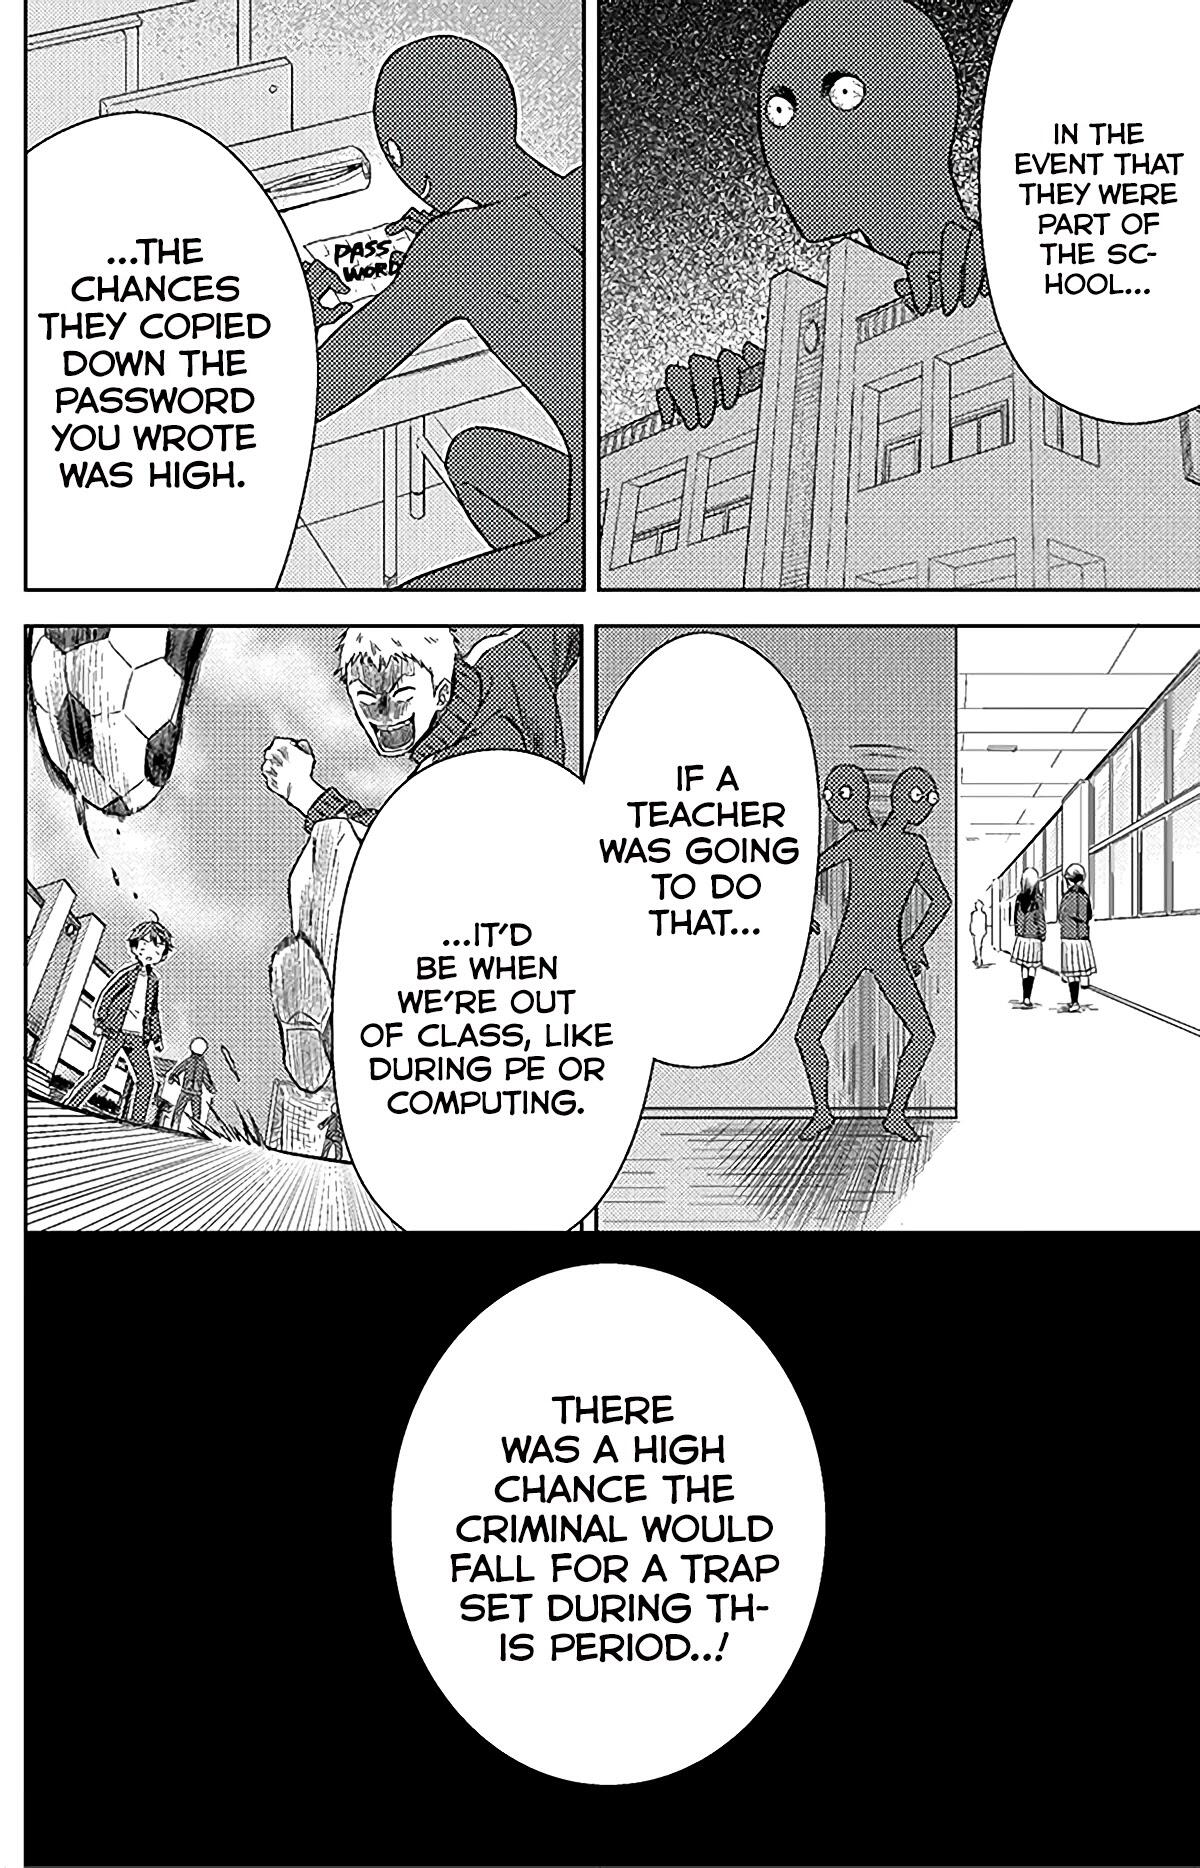 Detective-Kun, You're So Reliable! Chapter 8: Chapter 8 [End] page 9 - Mangakakalot